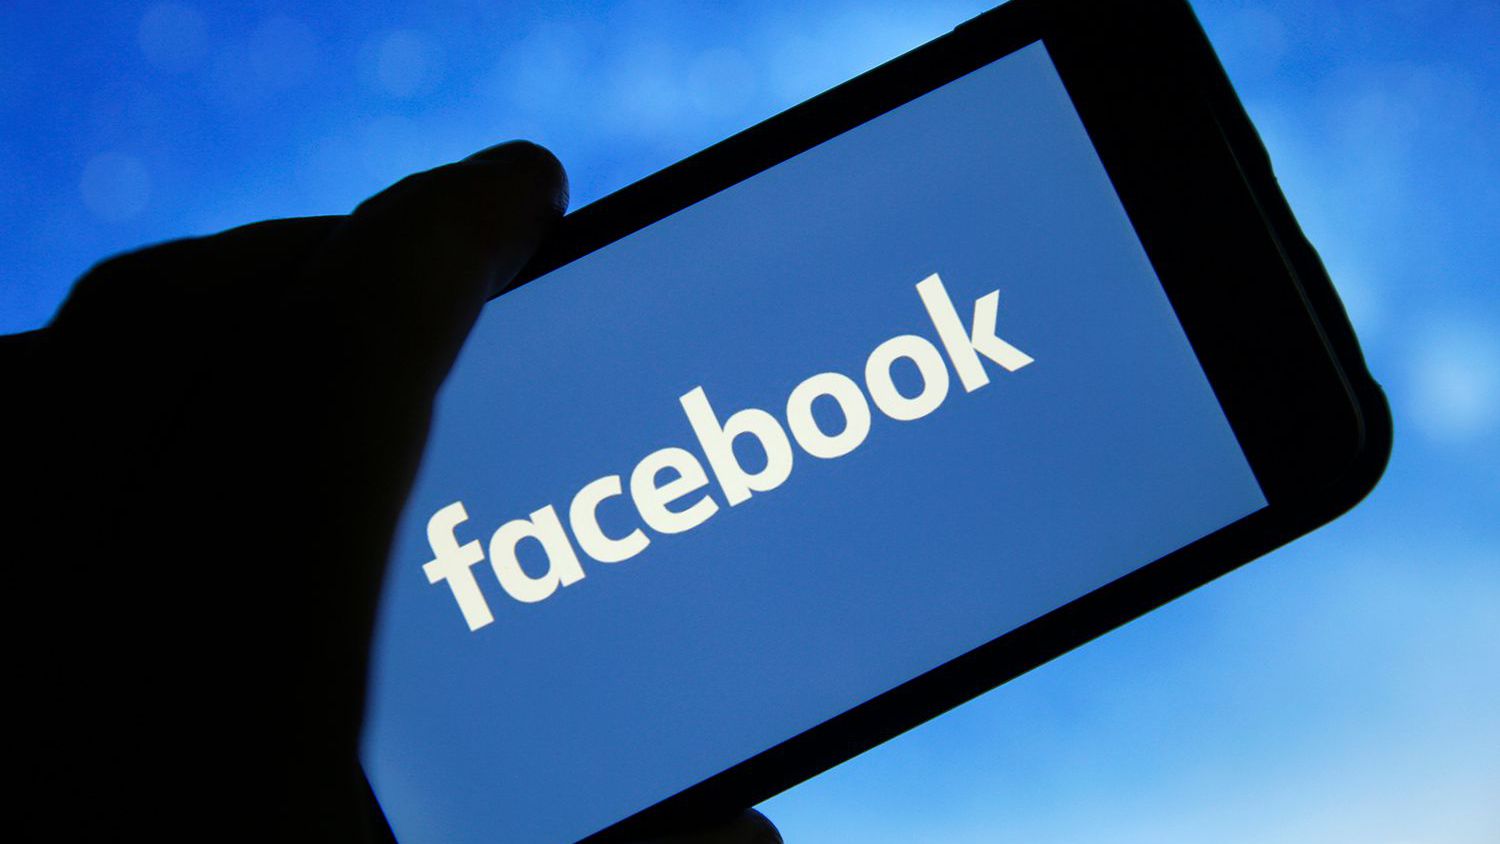 acebook content moderators call for company to put an end to overly restrictive NDAs